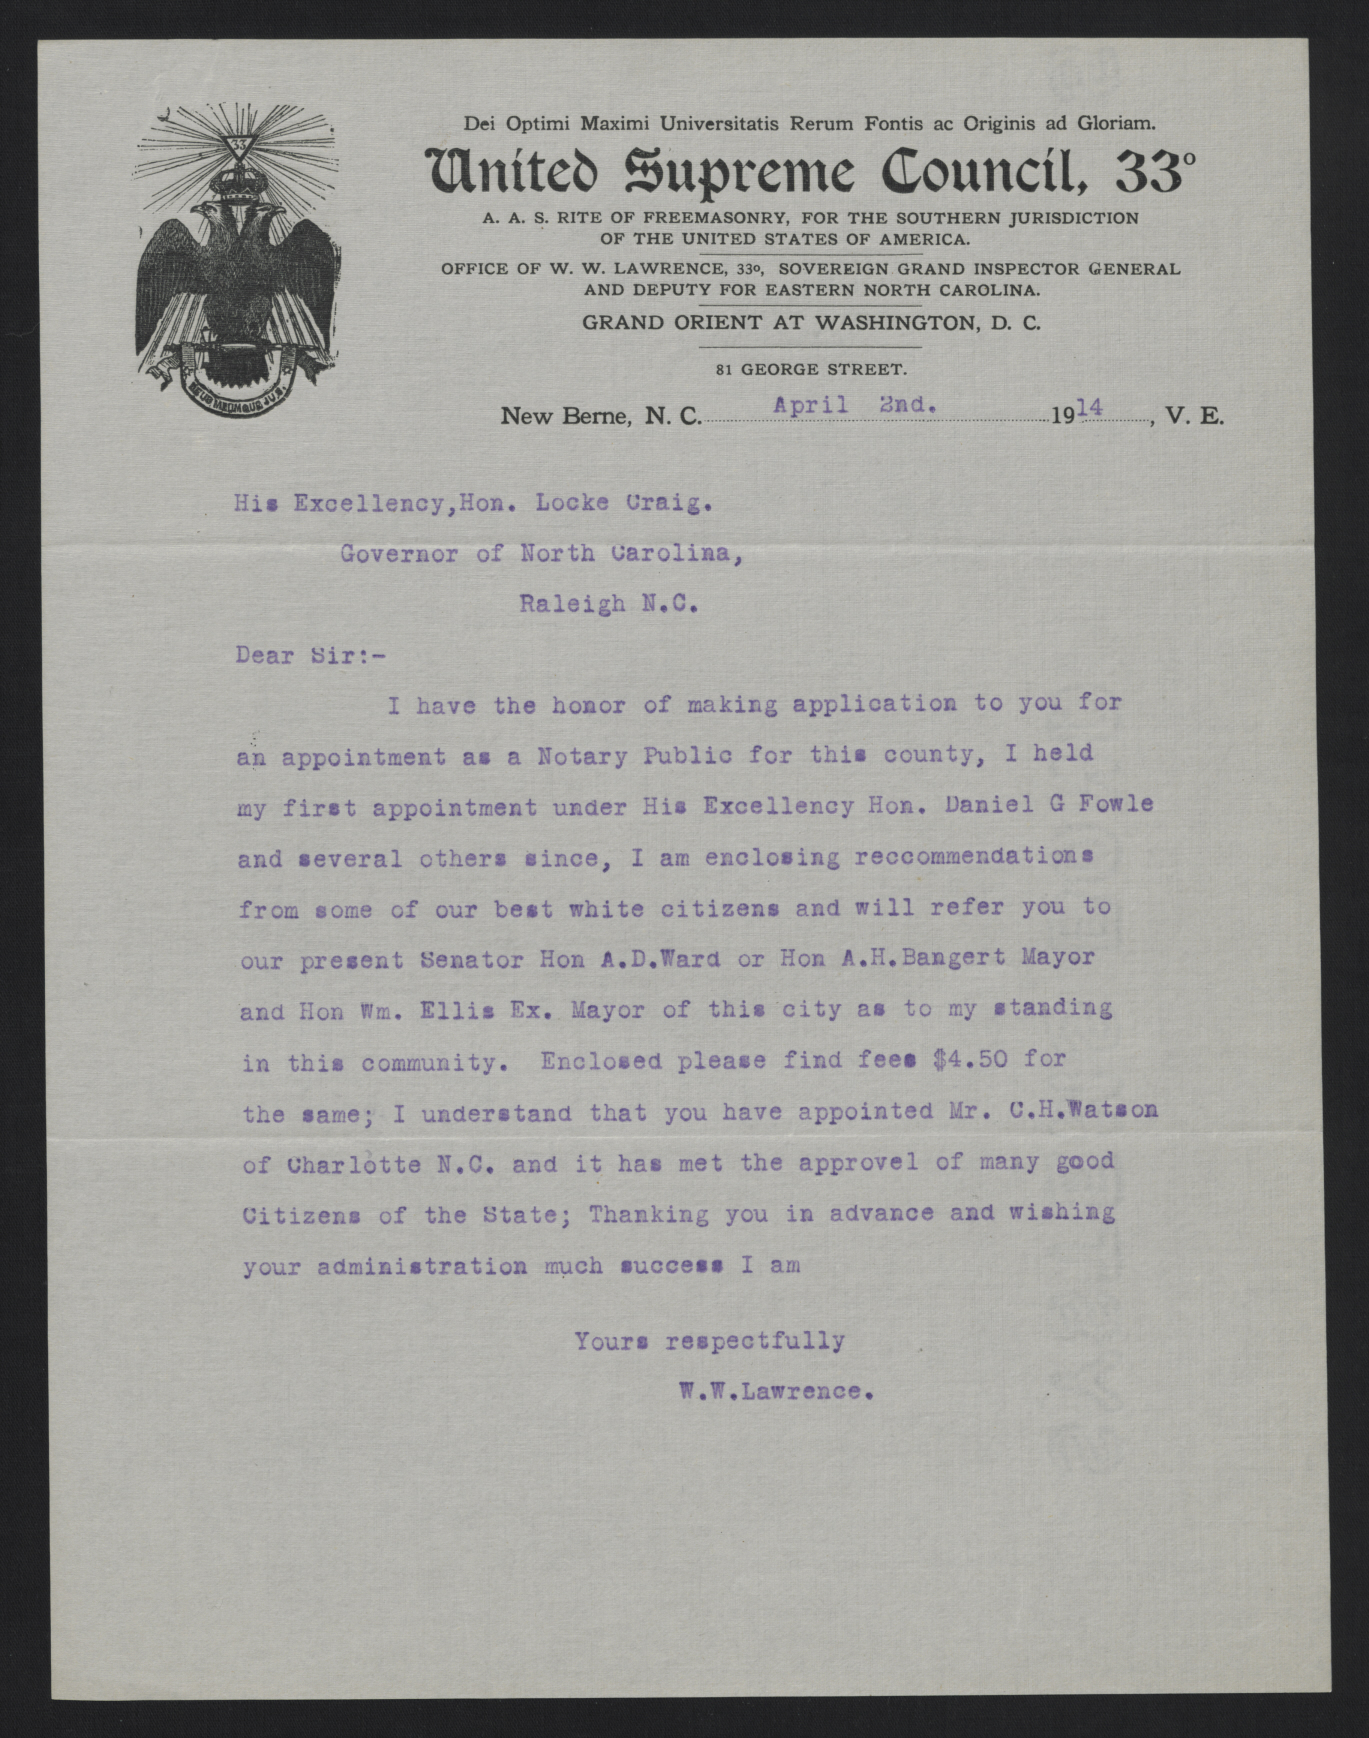 Letter from Lawrence to Craig, April 2, 1914